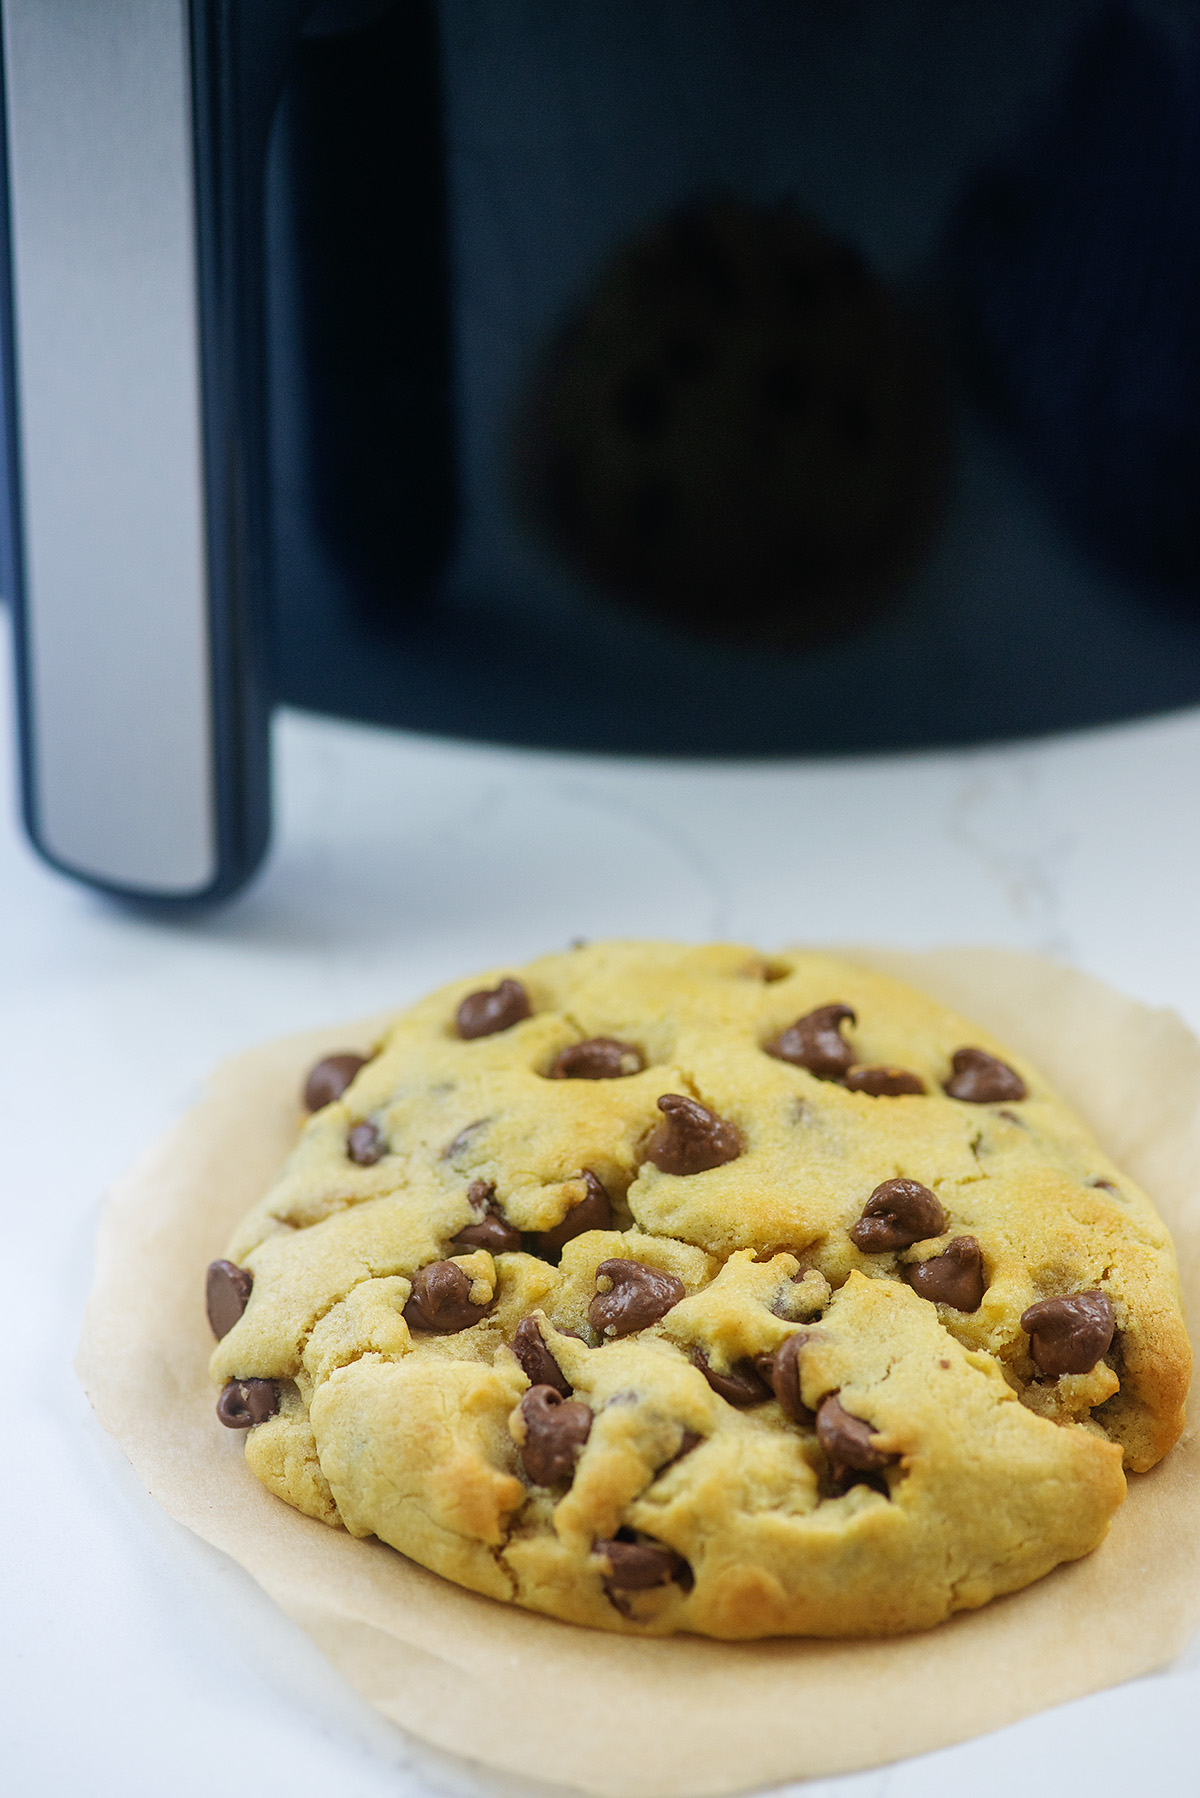 A single chocolate chip cookie in front of an air fryer